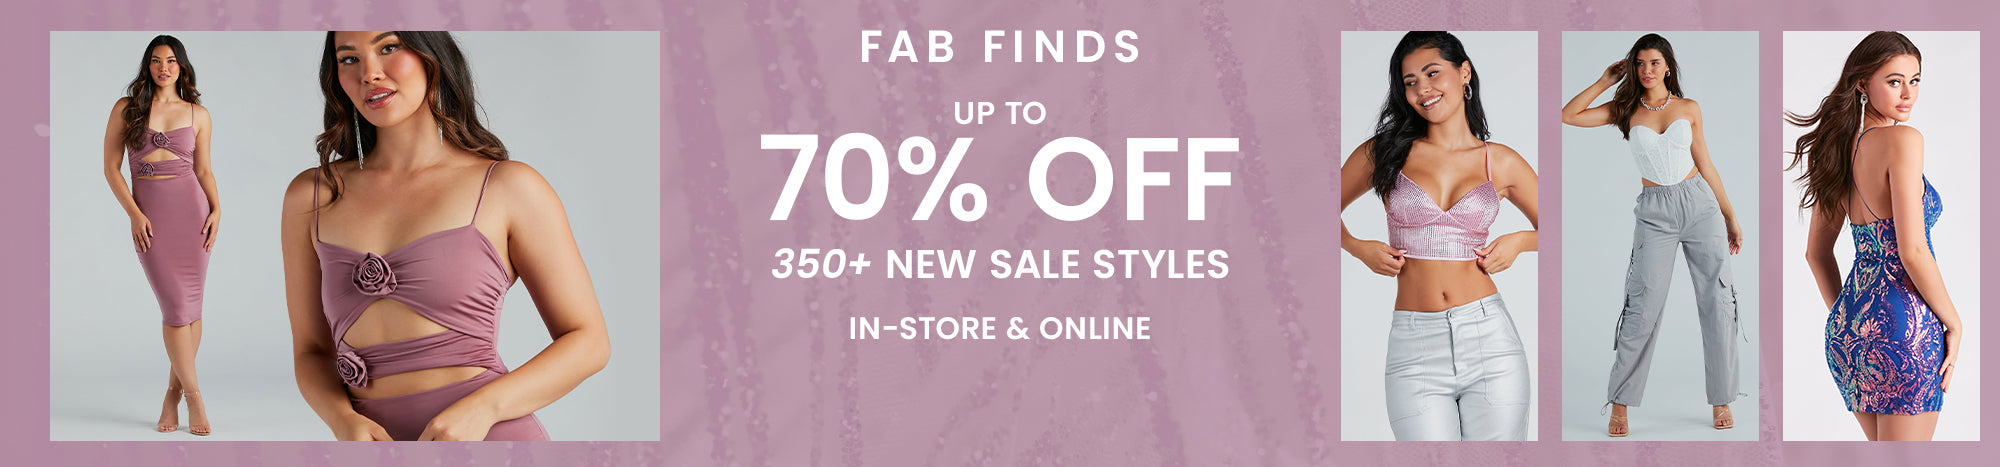 Shop Windsor's Clothing Sale & save up to 70% off new styles featuring a variety of casual to formal dresses, trendy tops, bustiers, pants, cargos, heels, & fab fashion finds and apparel on sale now!